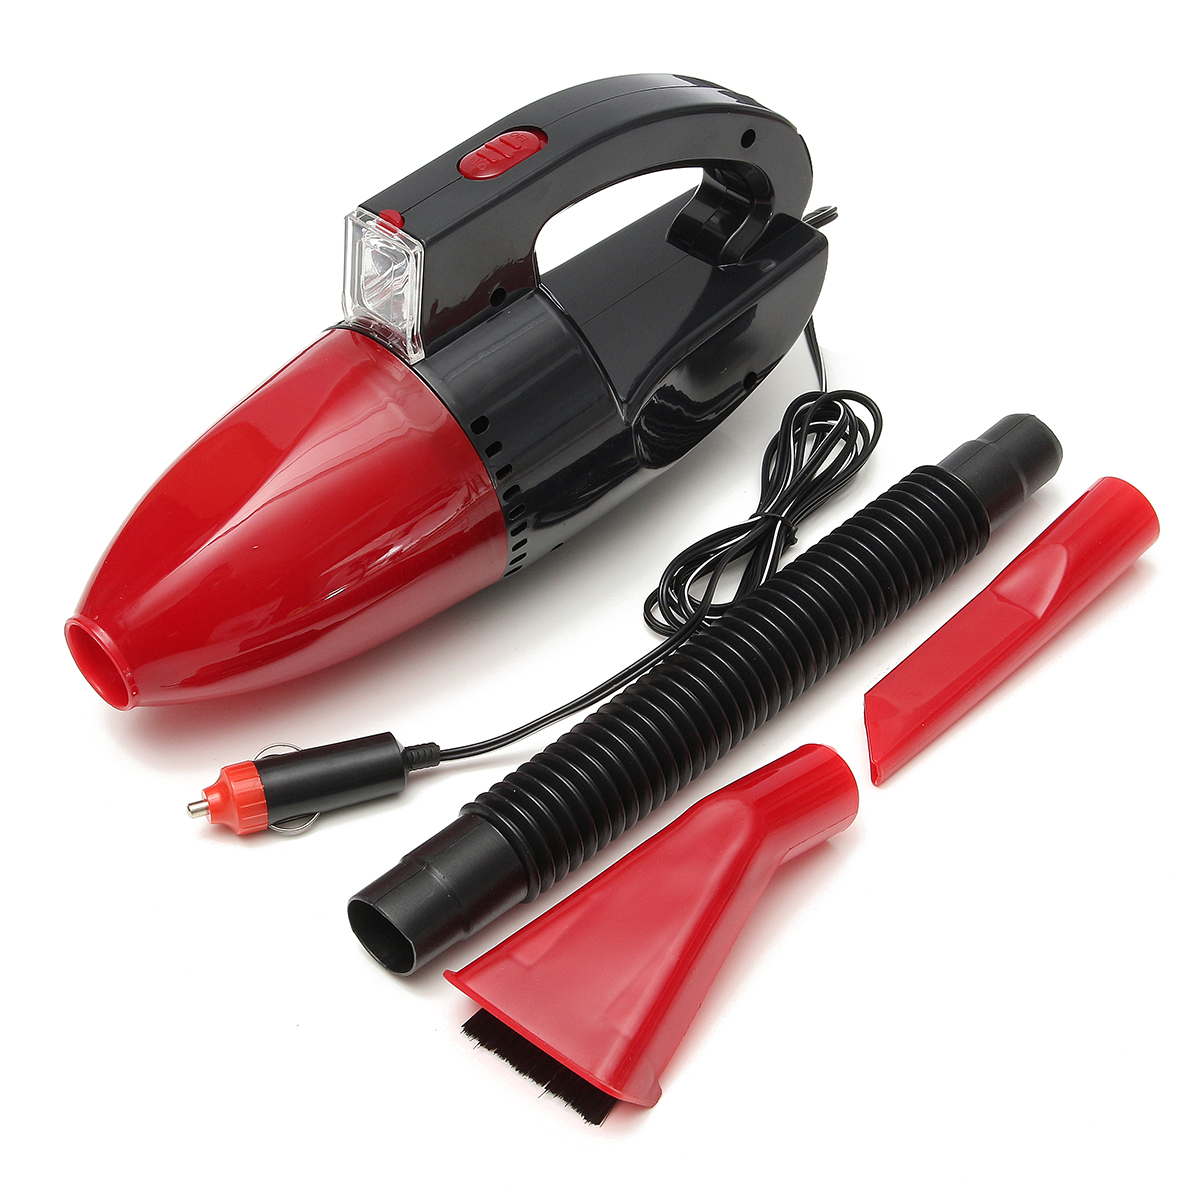 hoover 1800w wet and dry vacuum cleaner manual